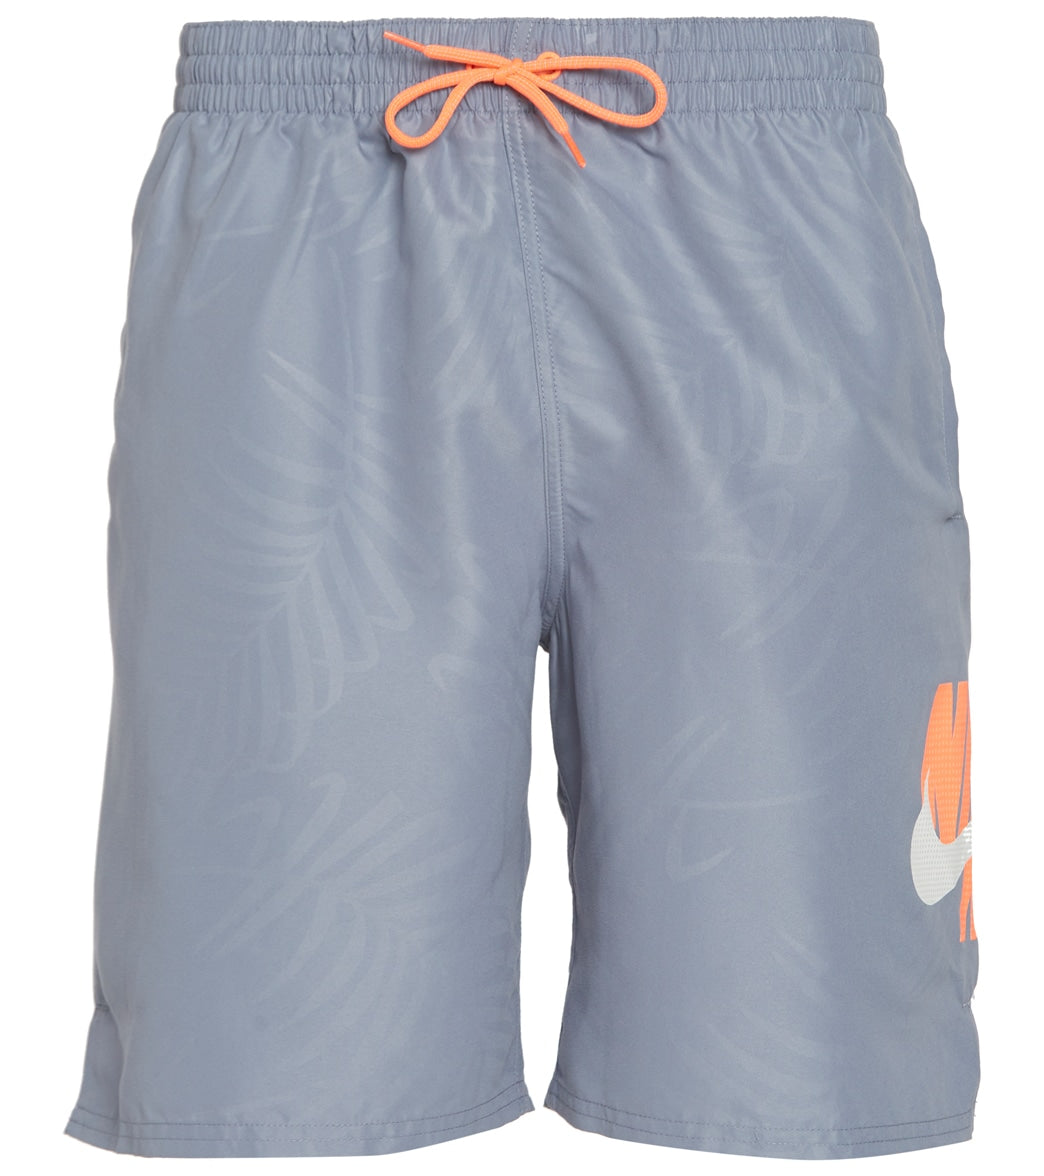 Nike Men's 20" Palm Volley Short at SwimOutlet.com